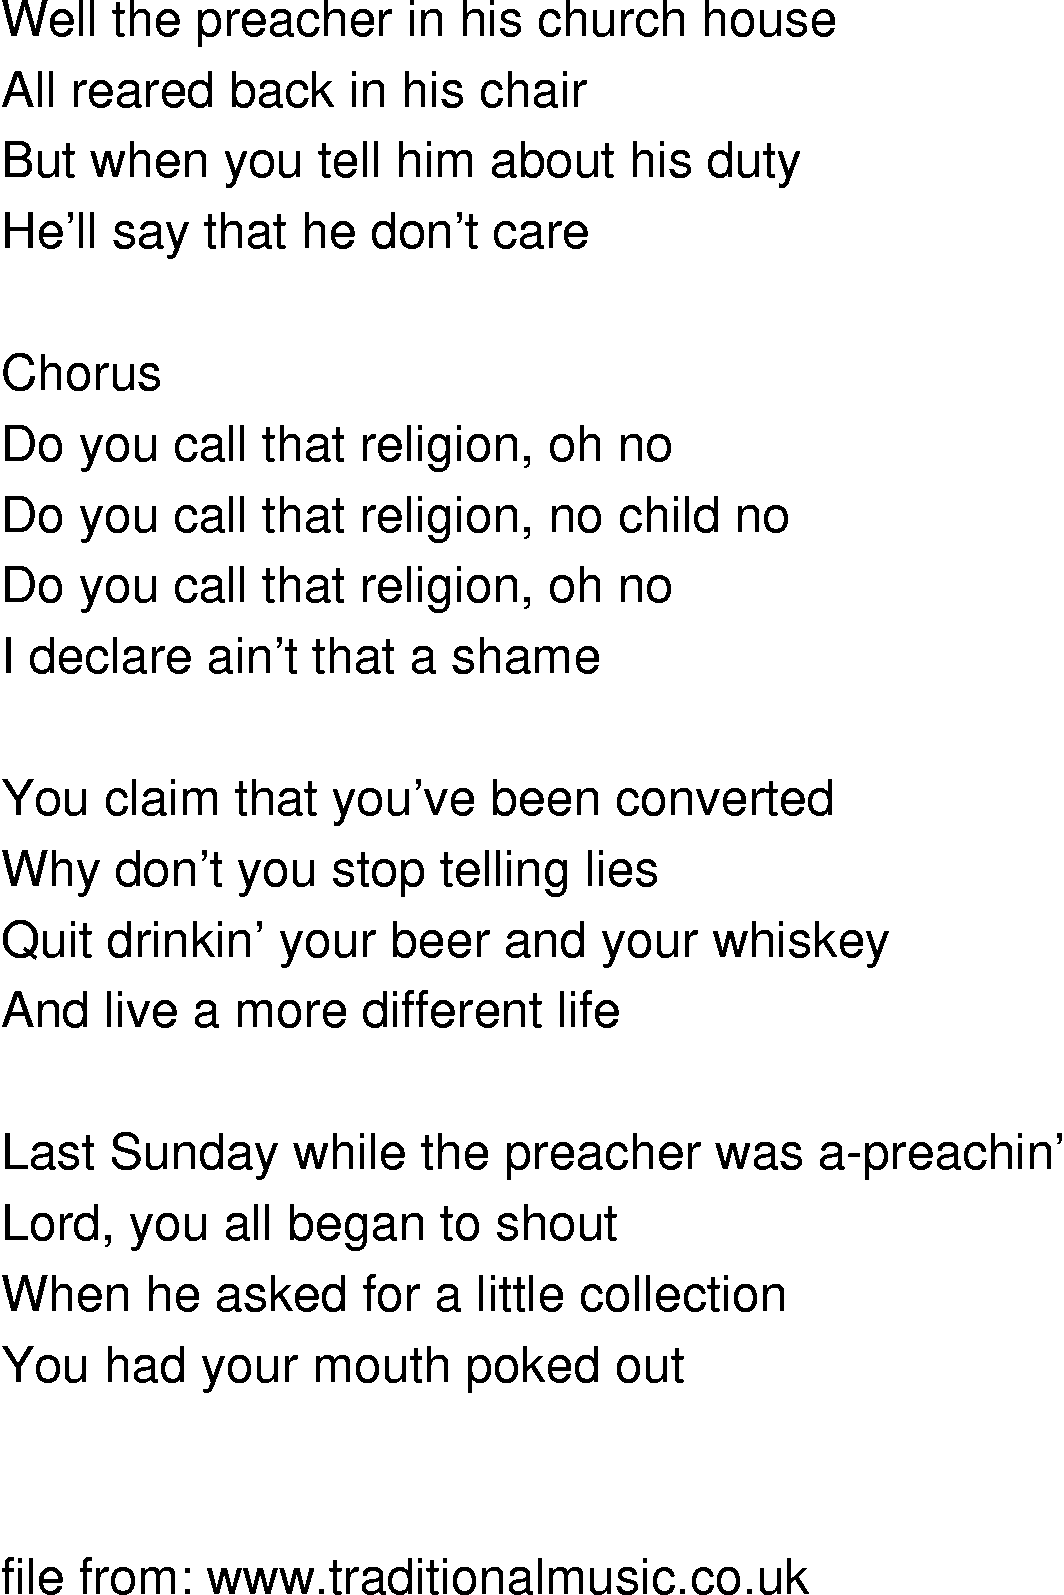 Old-Time (oldtimey) Song Lyrics - do you call that religion